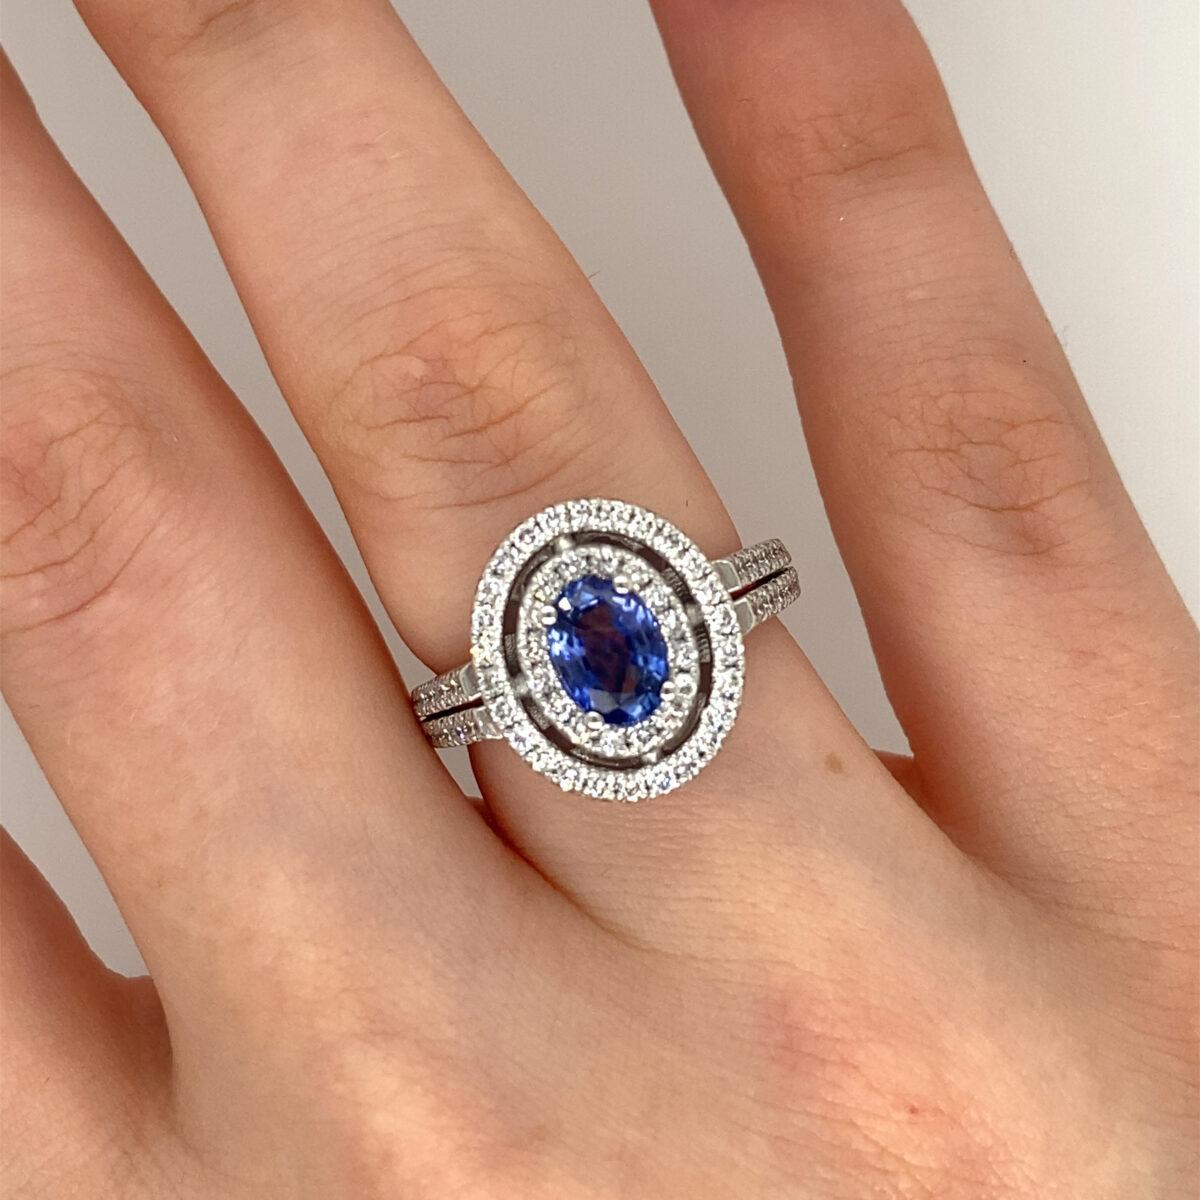 Women's 1.04ct Certified Natural Ceylon Sapphire Ring Surrounded by 0.87ct Diamonds For Sale